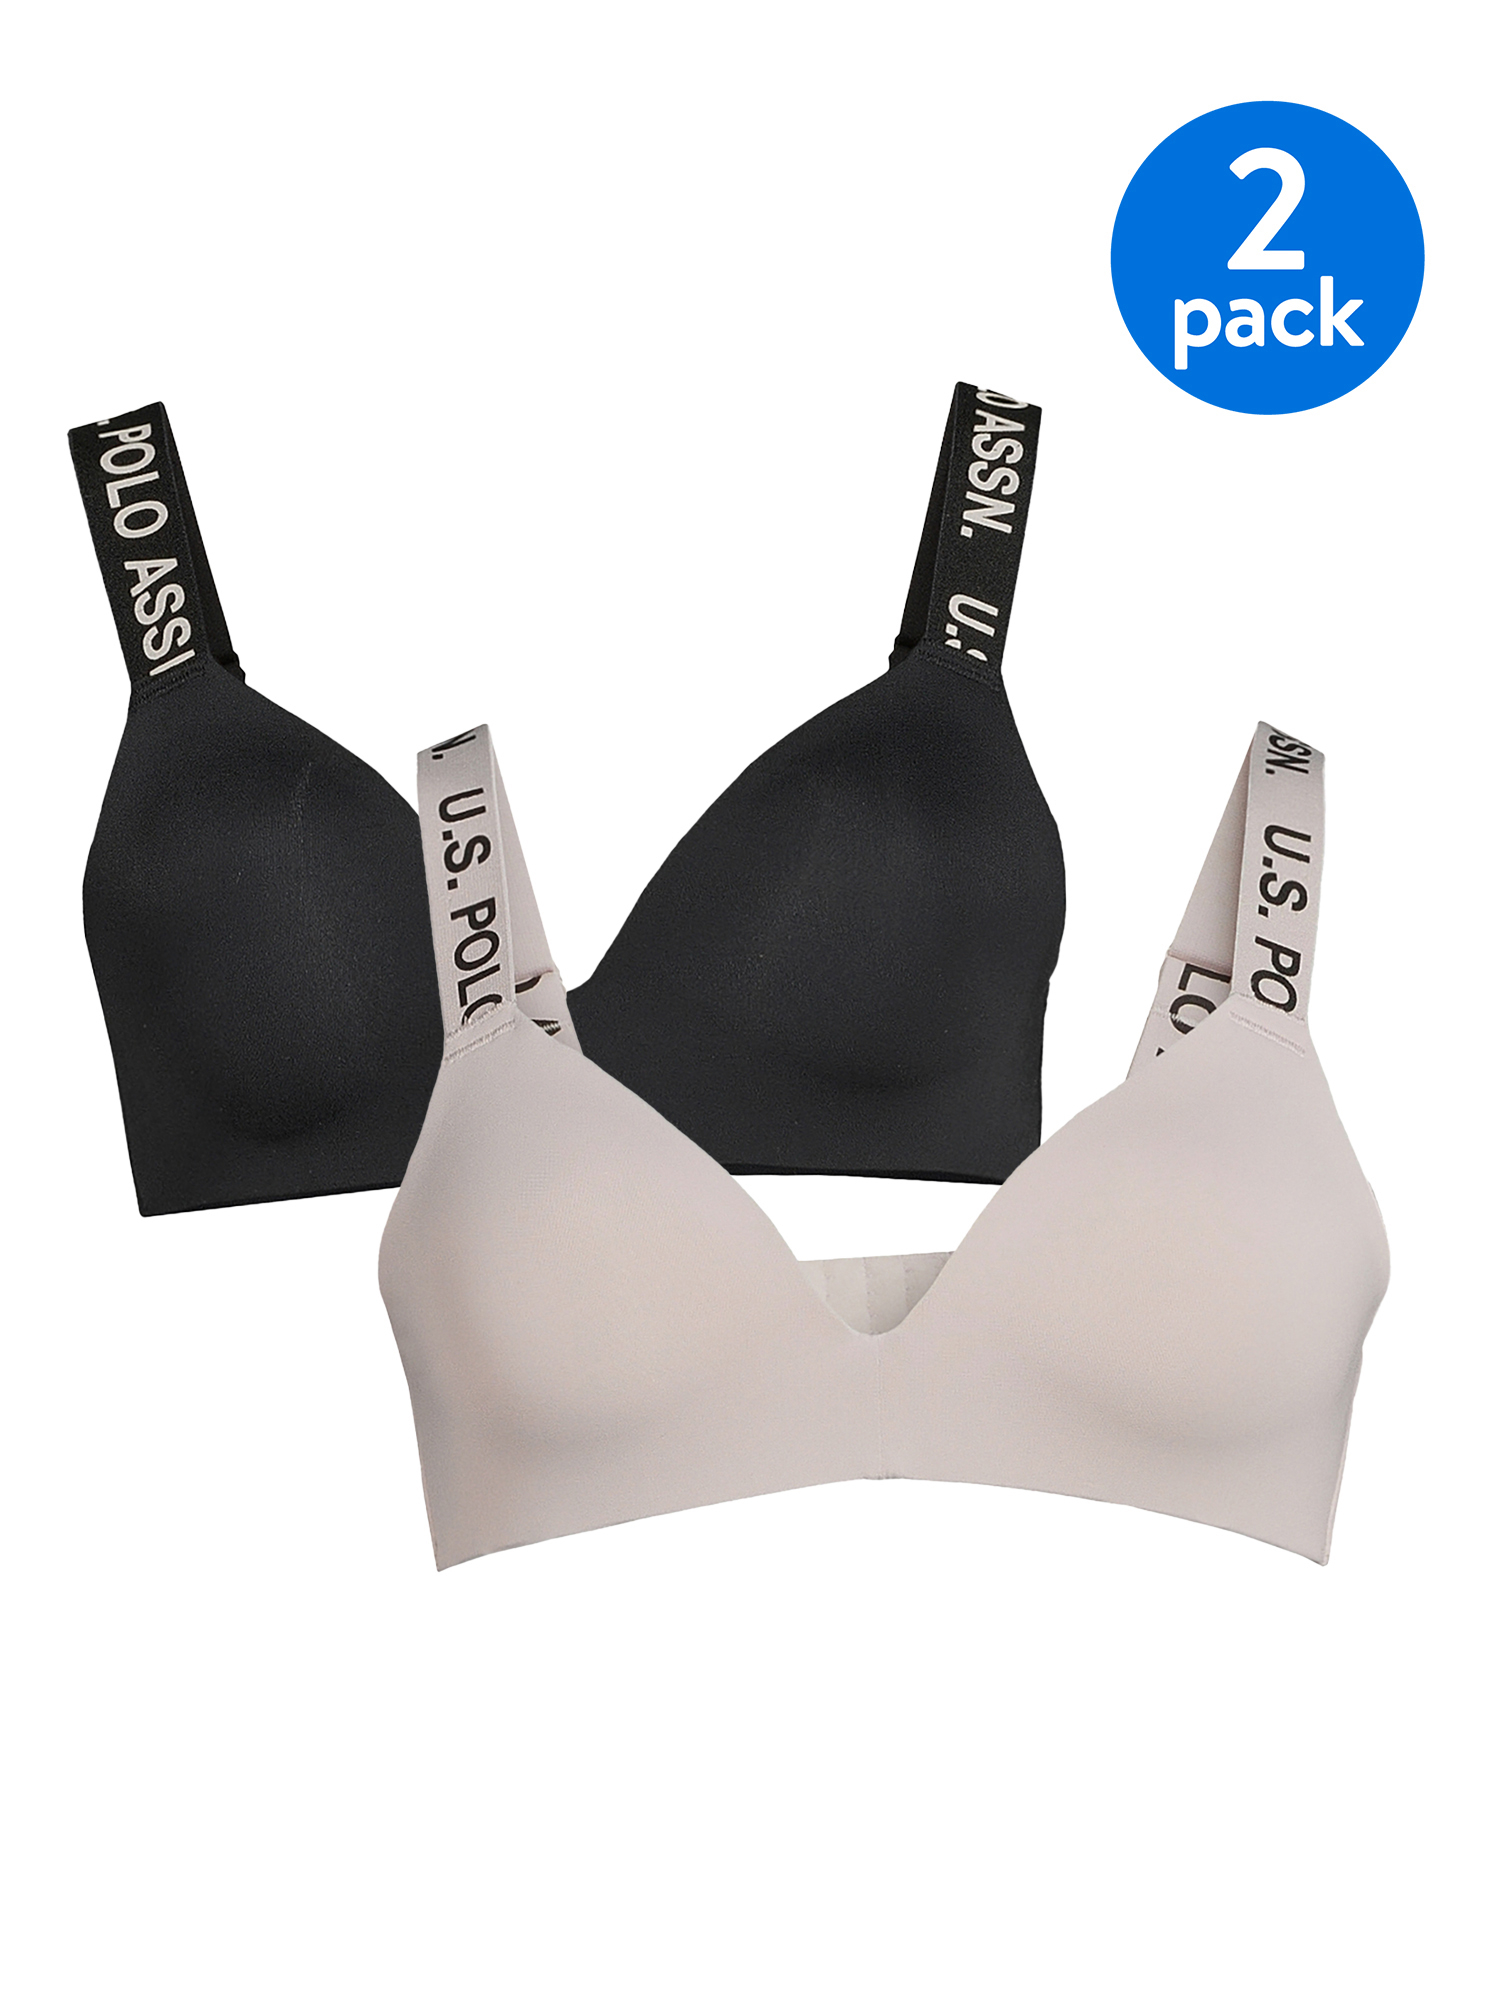 U.S. Polo Assn. Women's 2 Pack Tag-Free Microfiber Push Up Wire Free Bra Set - image 1 of 3